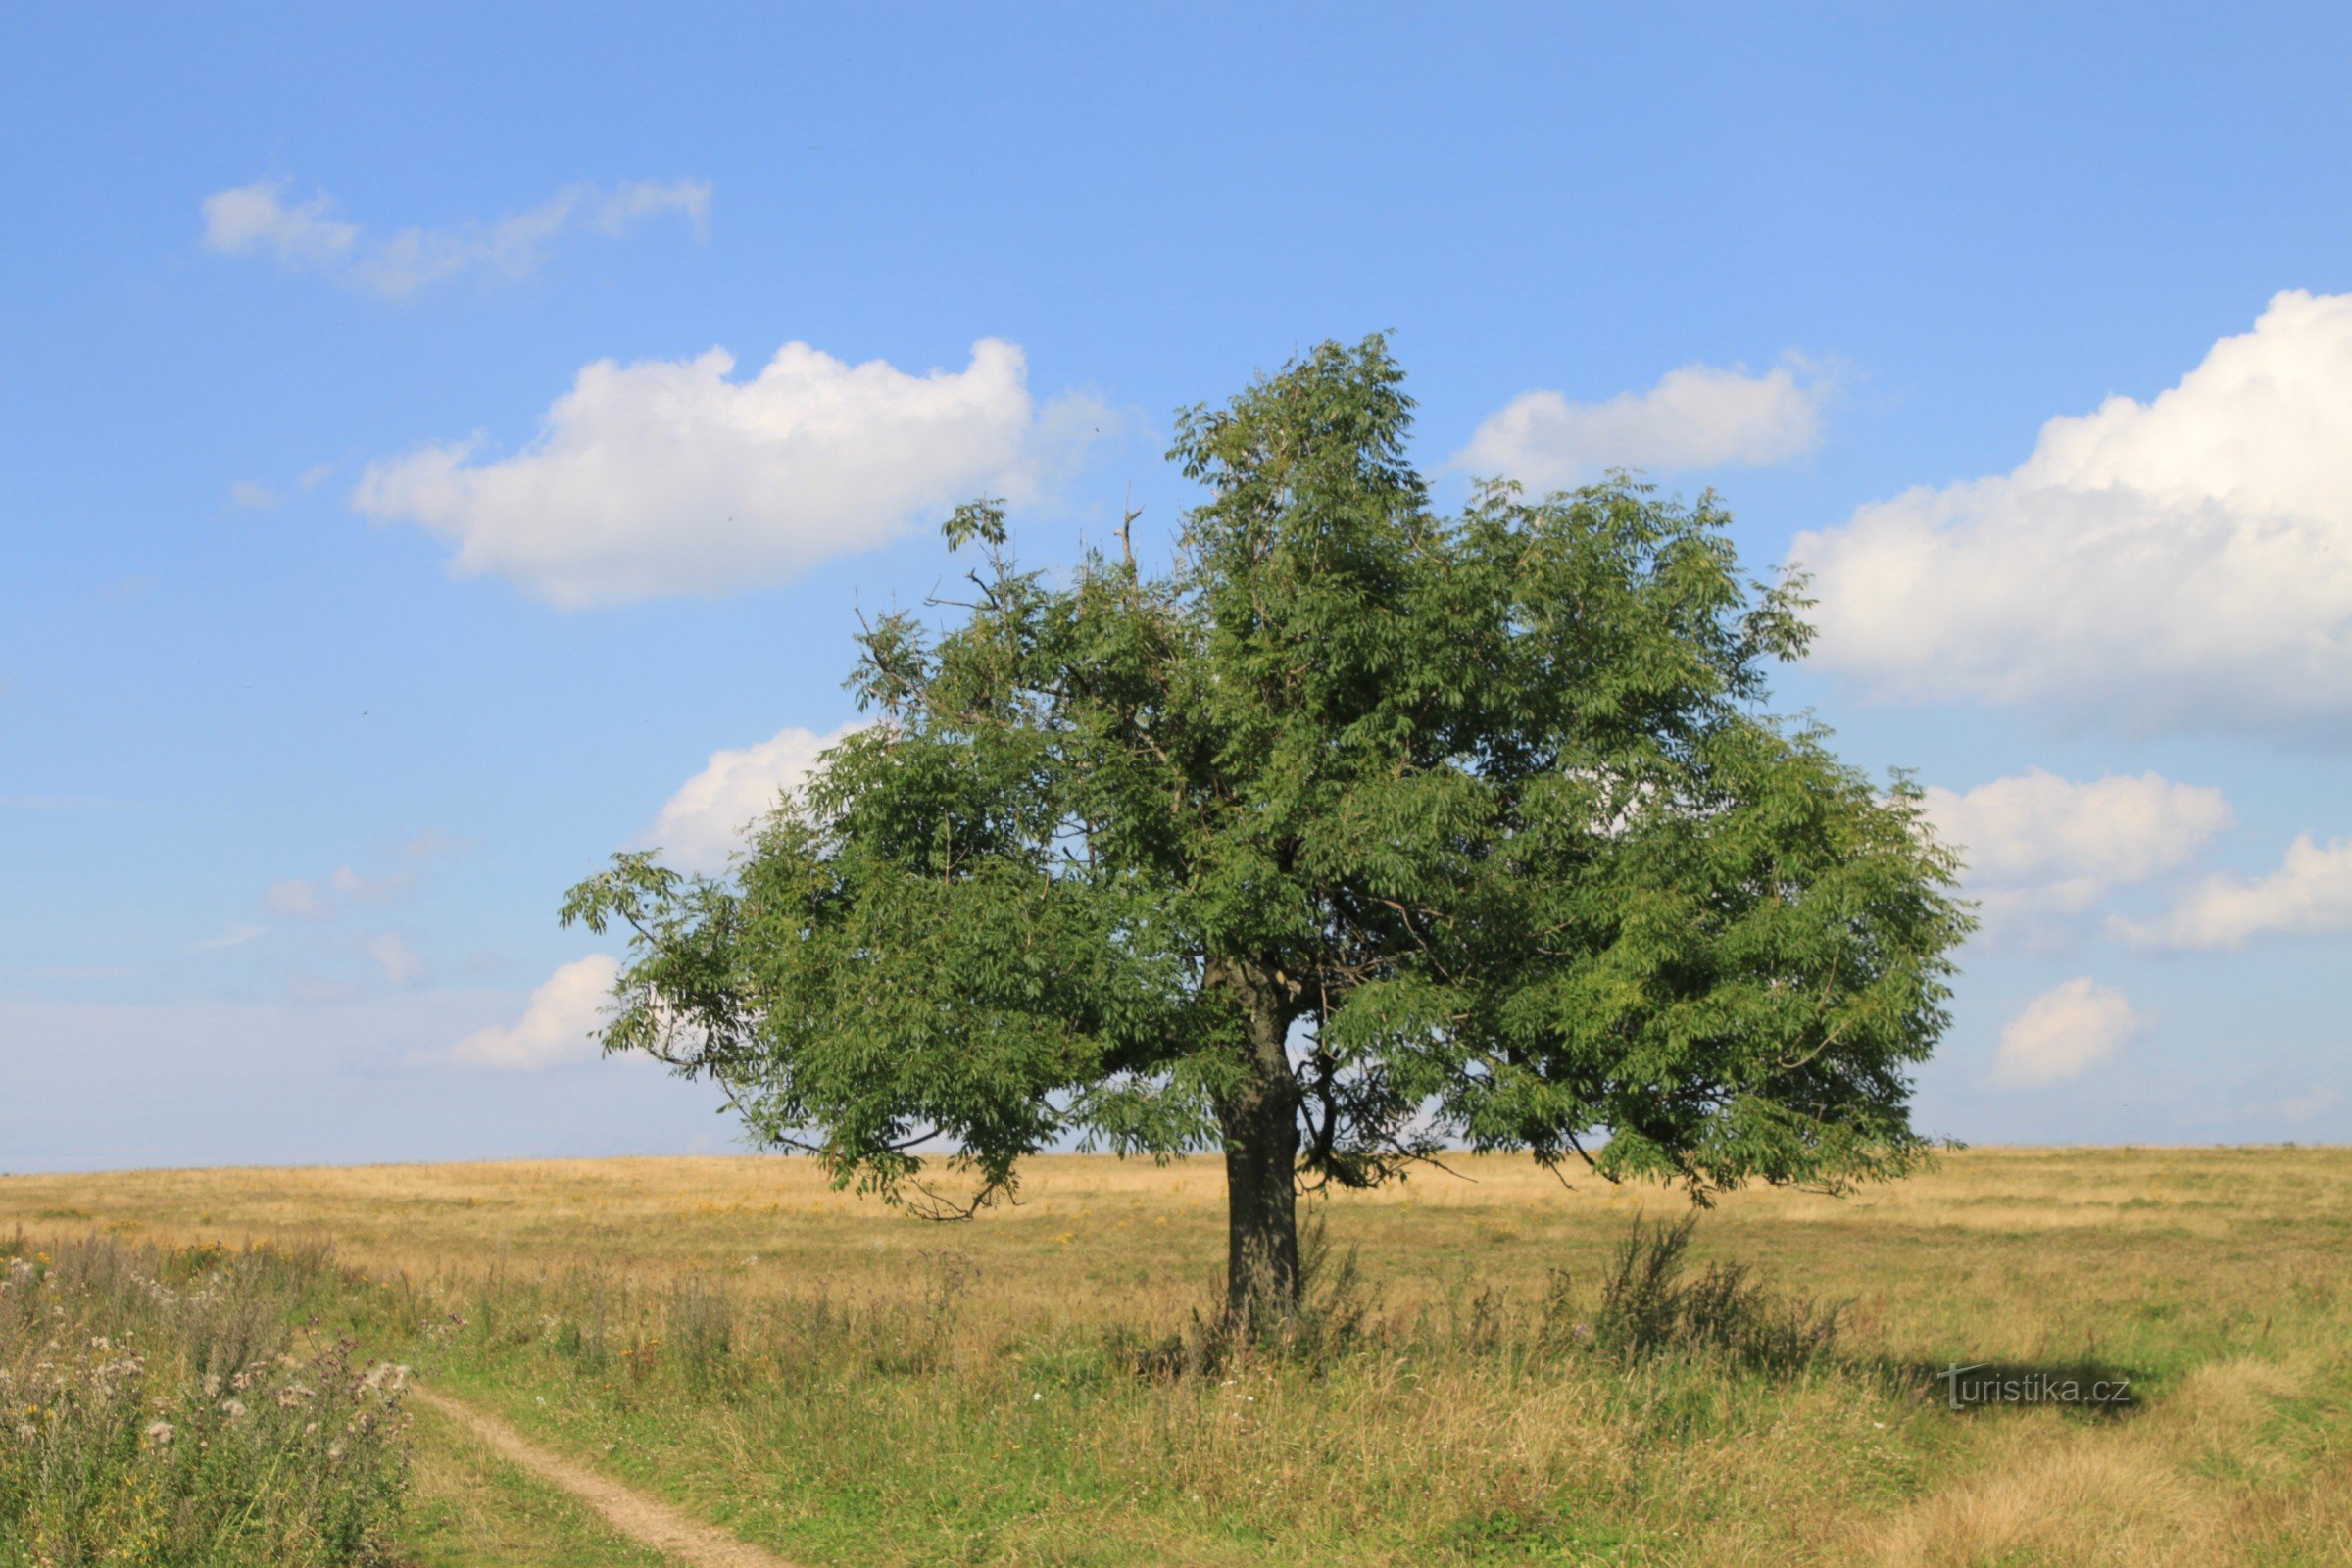 An ash tree visible from a distance by the road